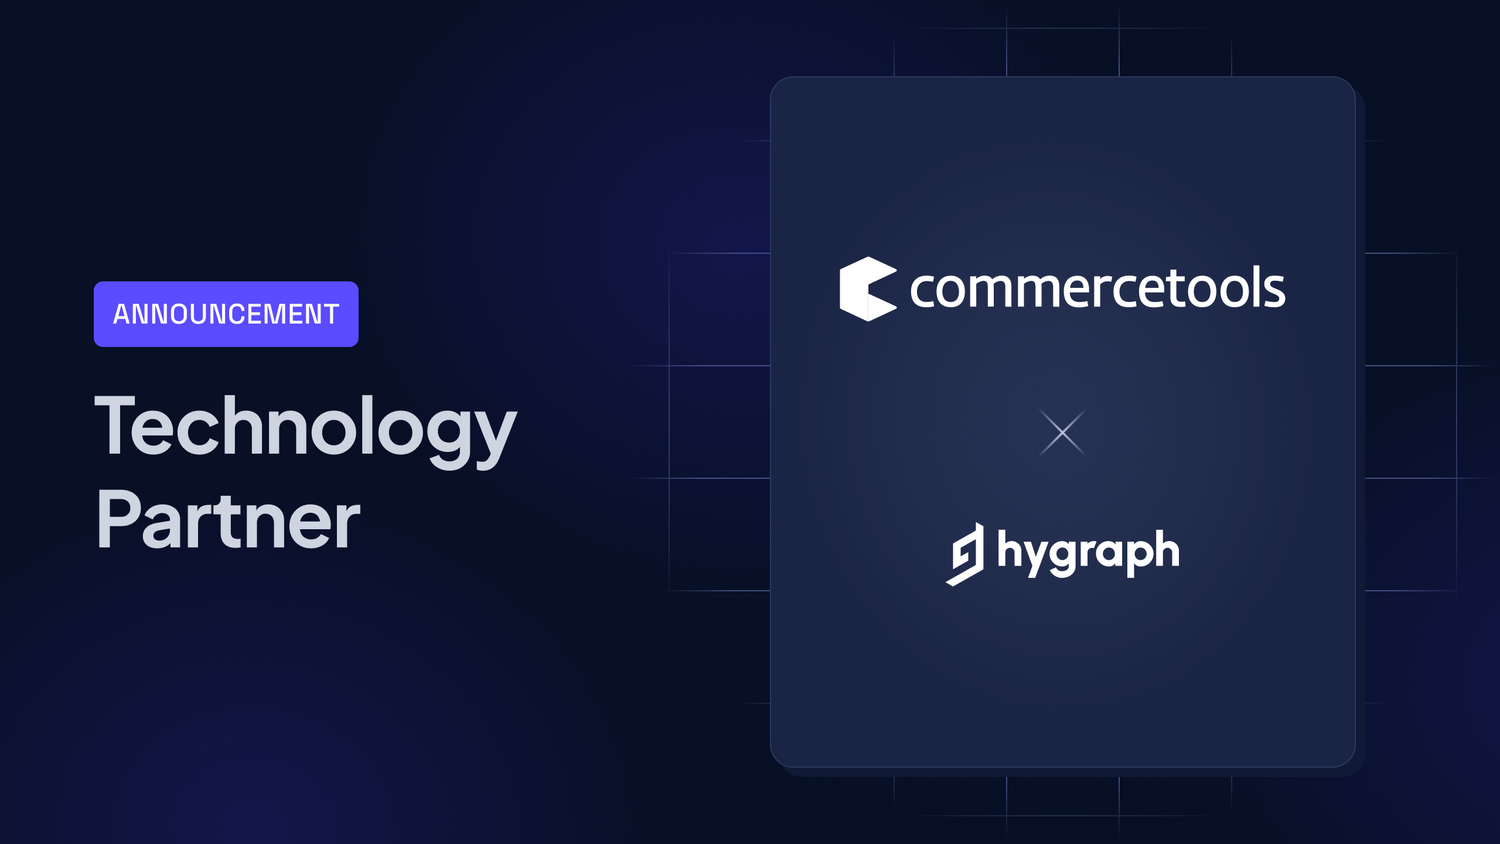 commercetools and hygraph logos